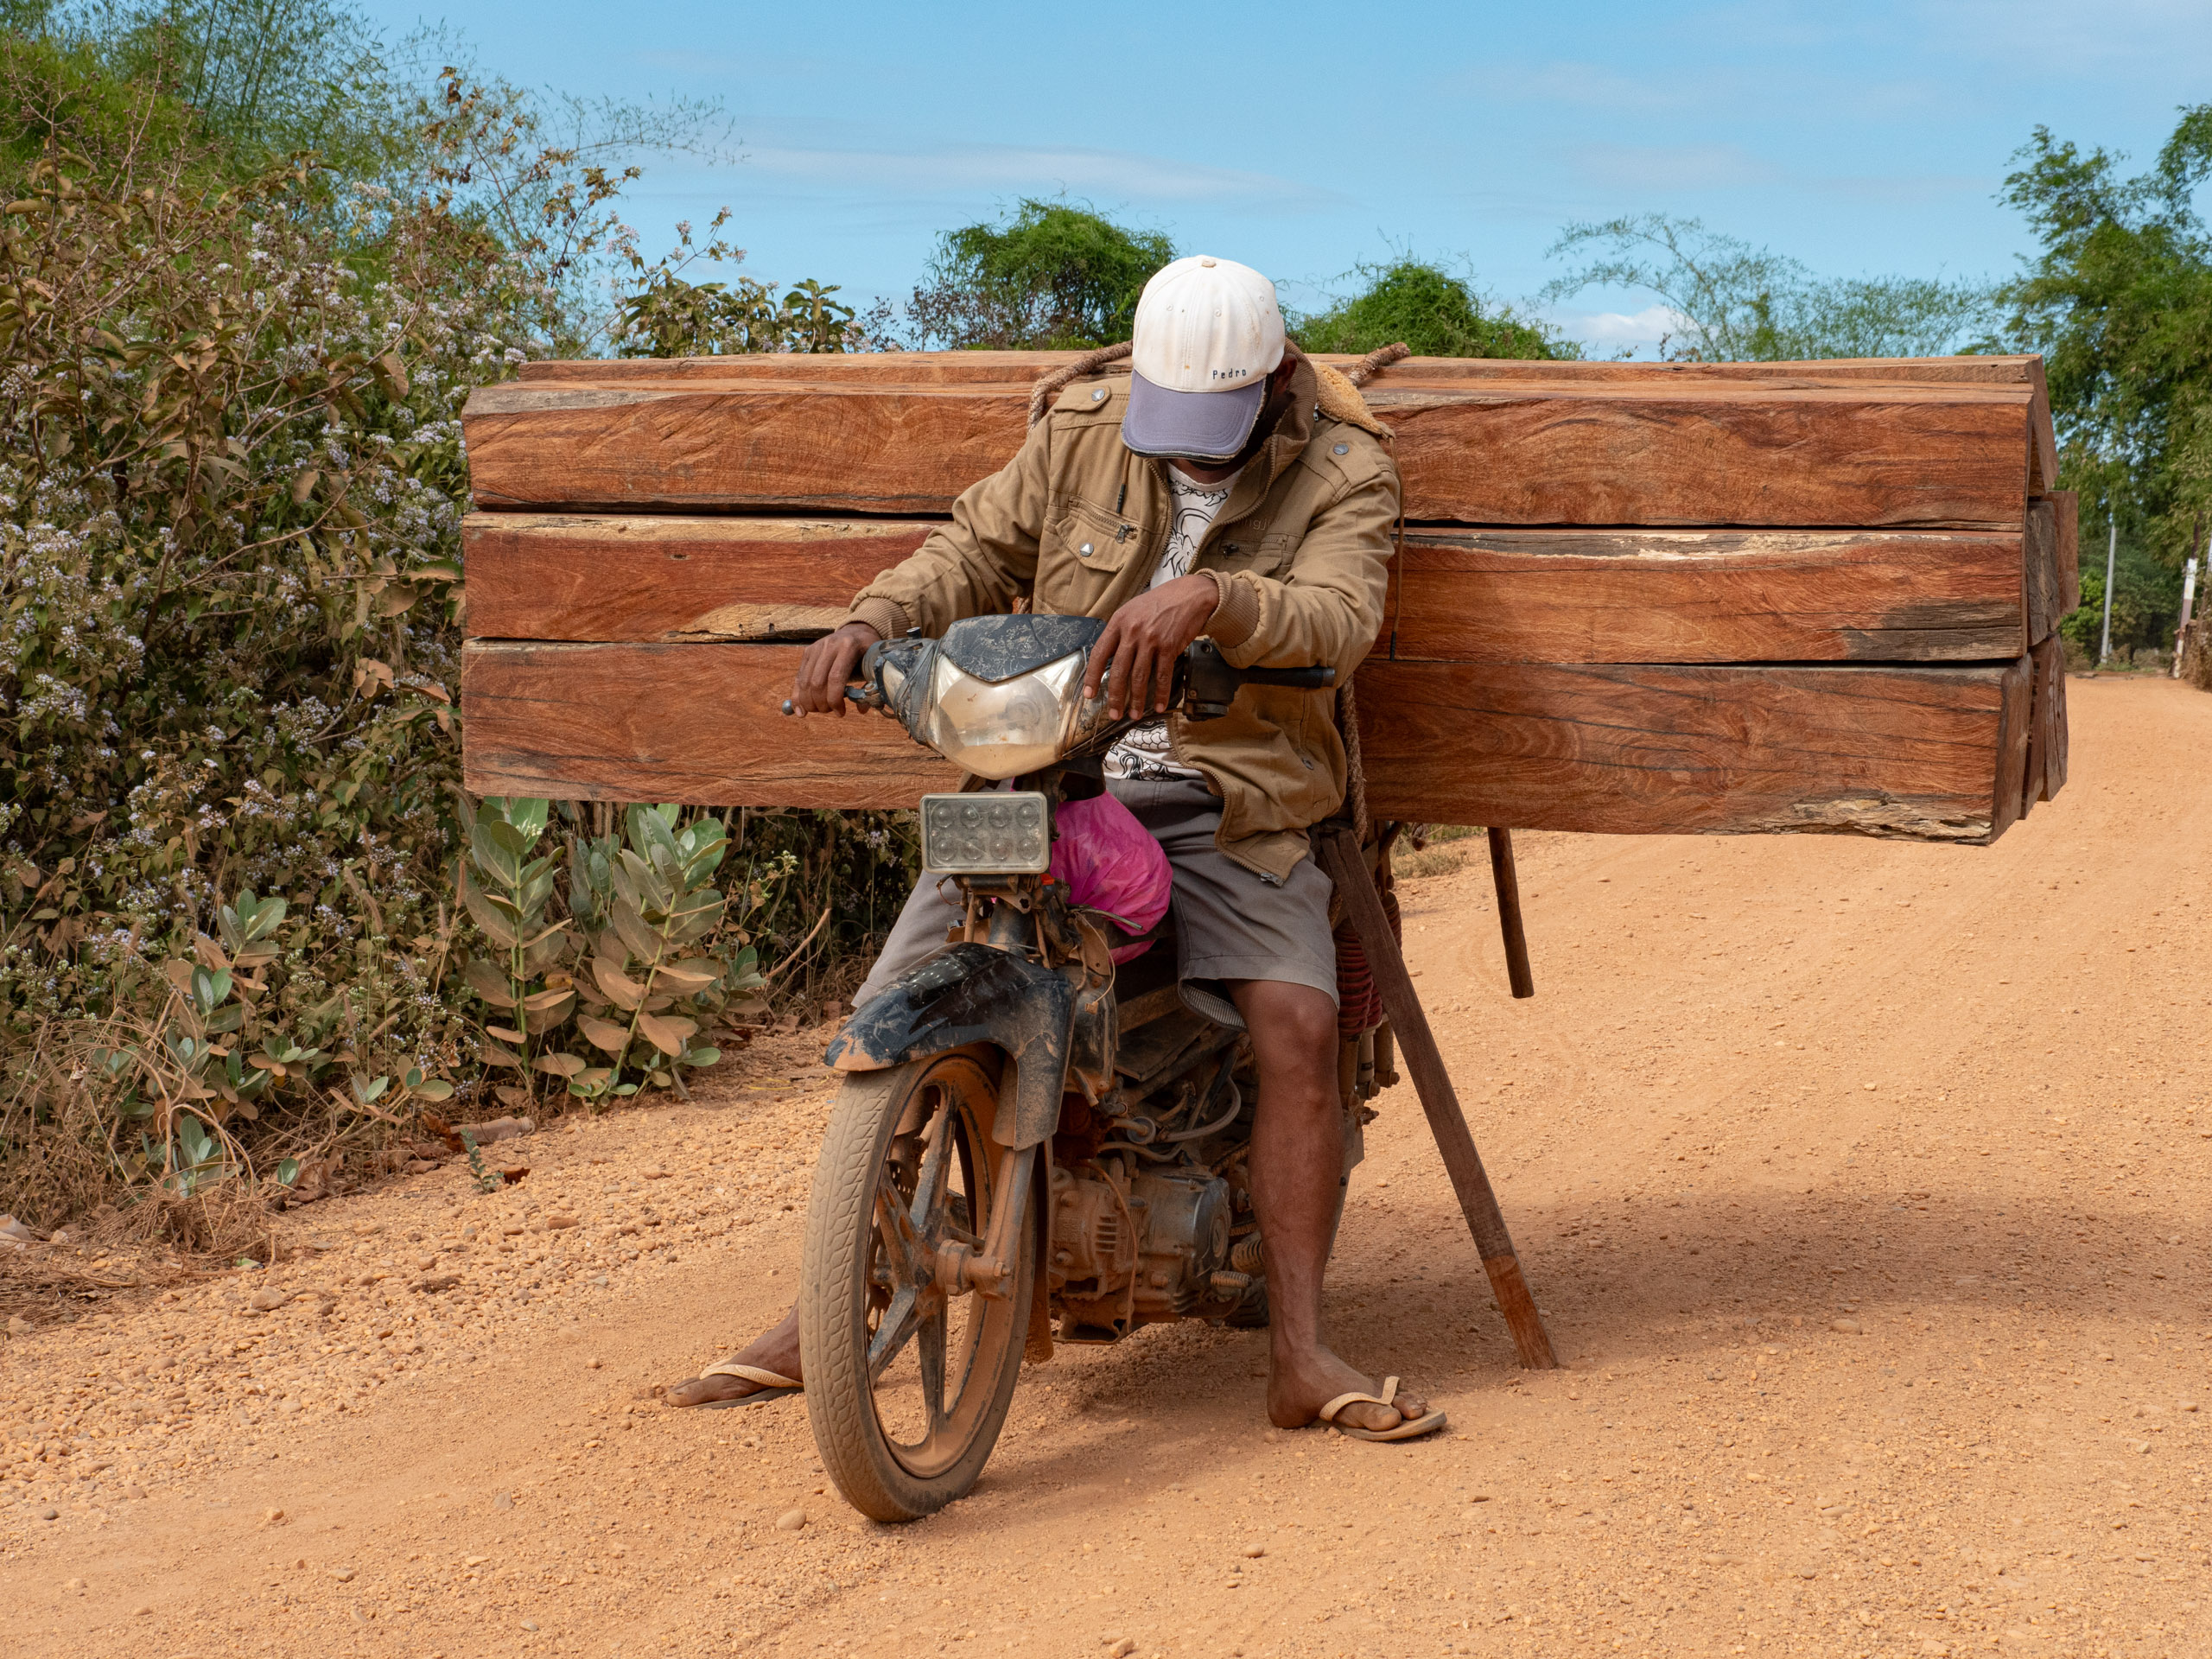 <p>A middleman hauls timber near Prey Lang Wildlife Sanctuary, eastern Cambodia, to service the 18% annual interest on his microloan debt (Image: Jack Brook)</p>